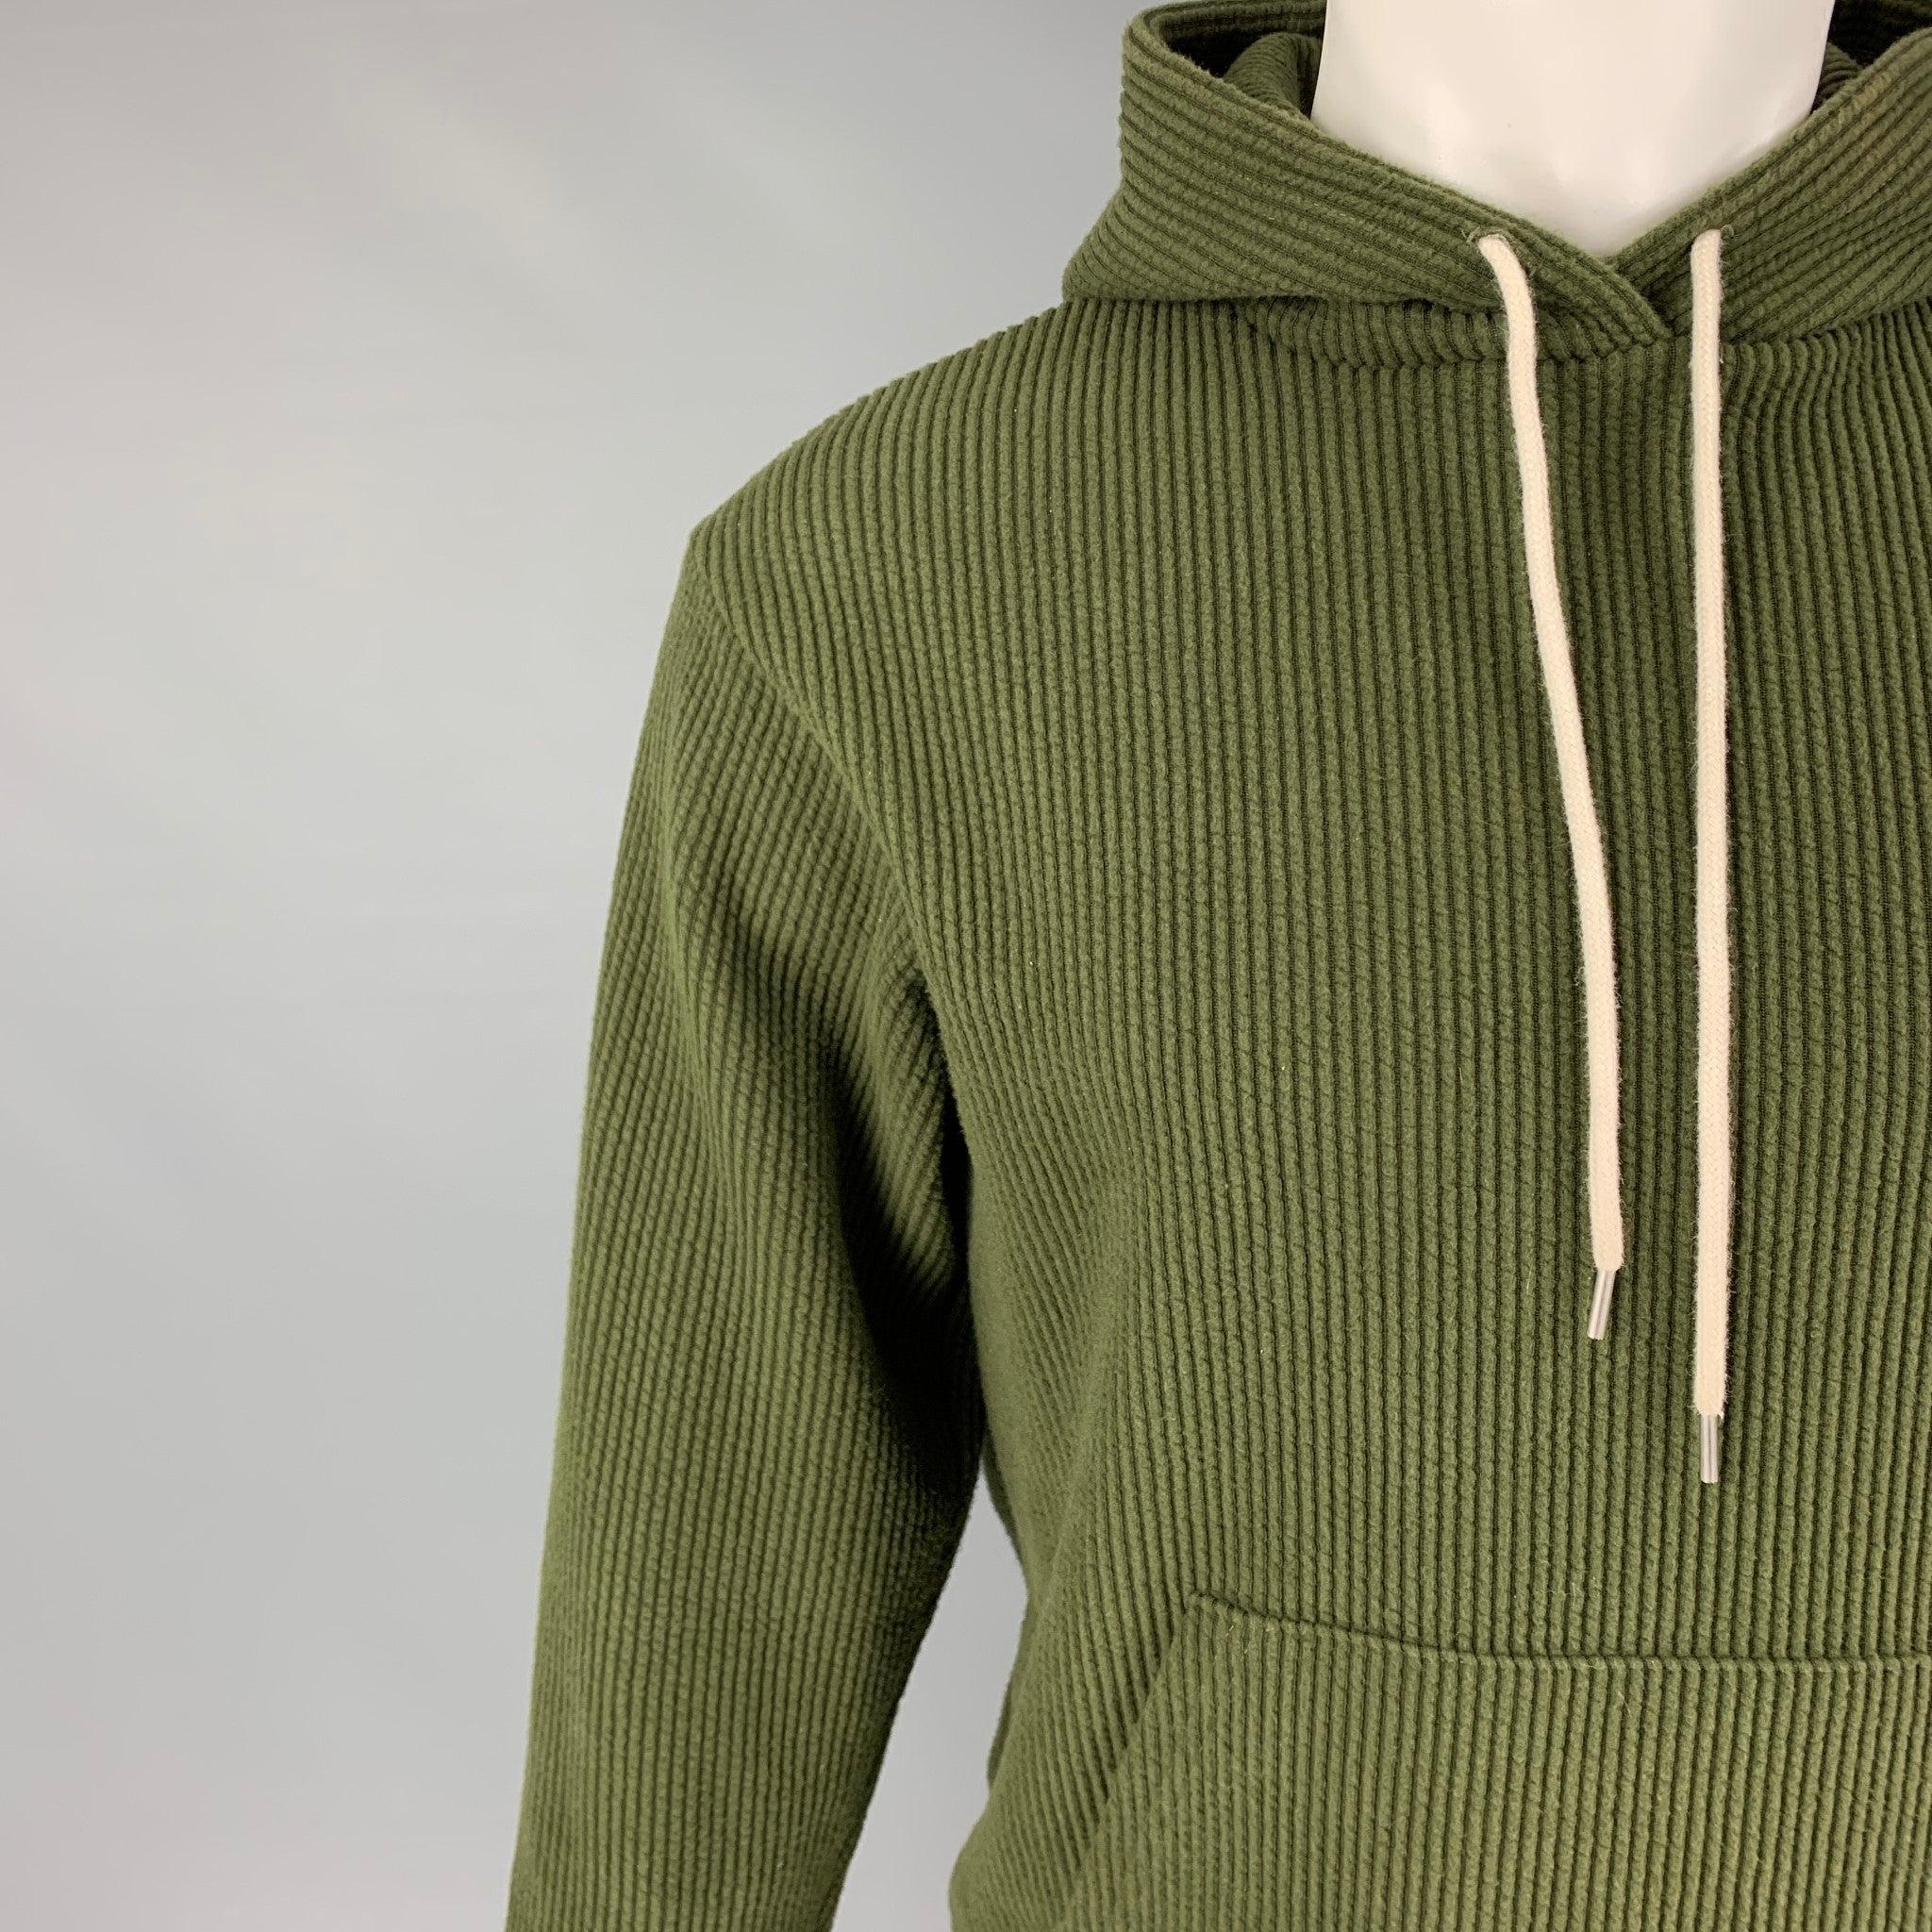 JOHN ELLIOTT sweatshirt comes in a green textured cotton / polyester featuring a hooded style, pouch pocket, and a white drawstring. Made in USA.Excellent Pre-Owned Condition. 

Marked:   1 

Measurements: 
 
Shoulder: 18 inches Chest: 38 inches